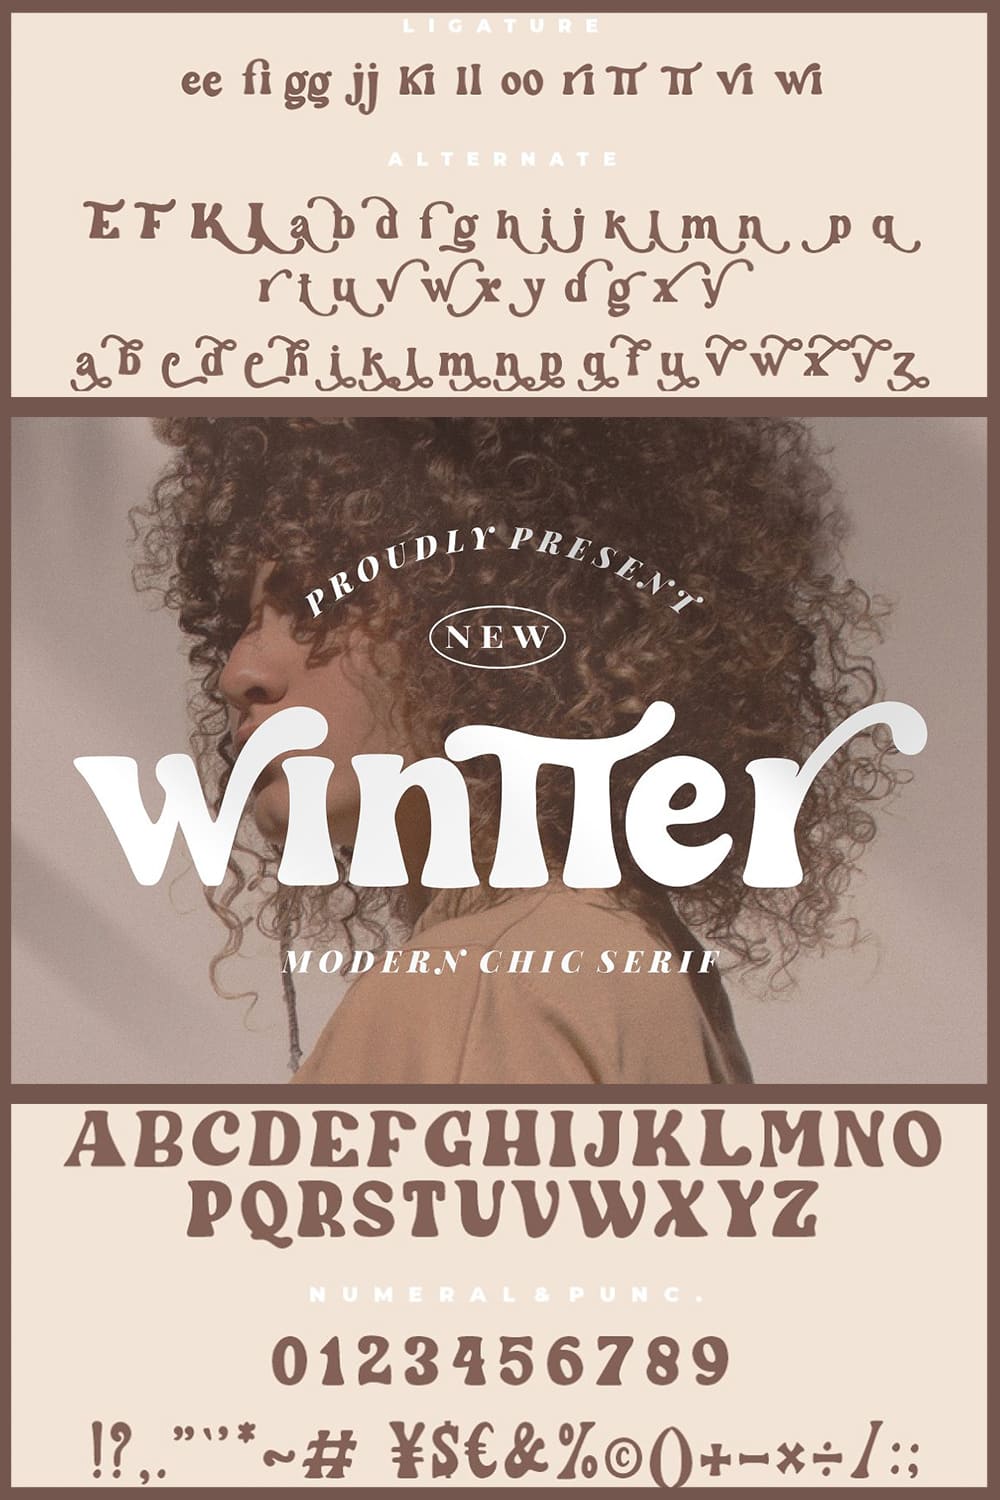 Wintter Modern Chic Serif Symbols Preview.